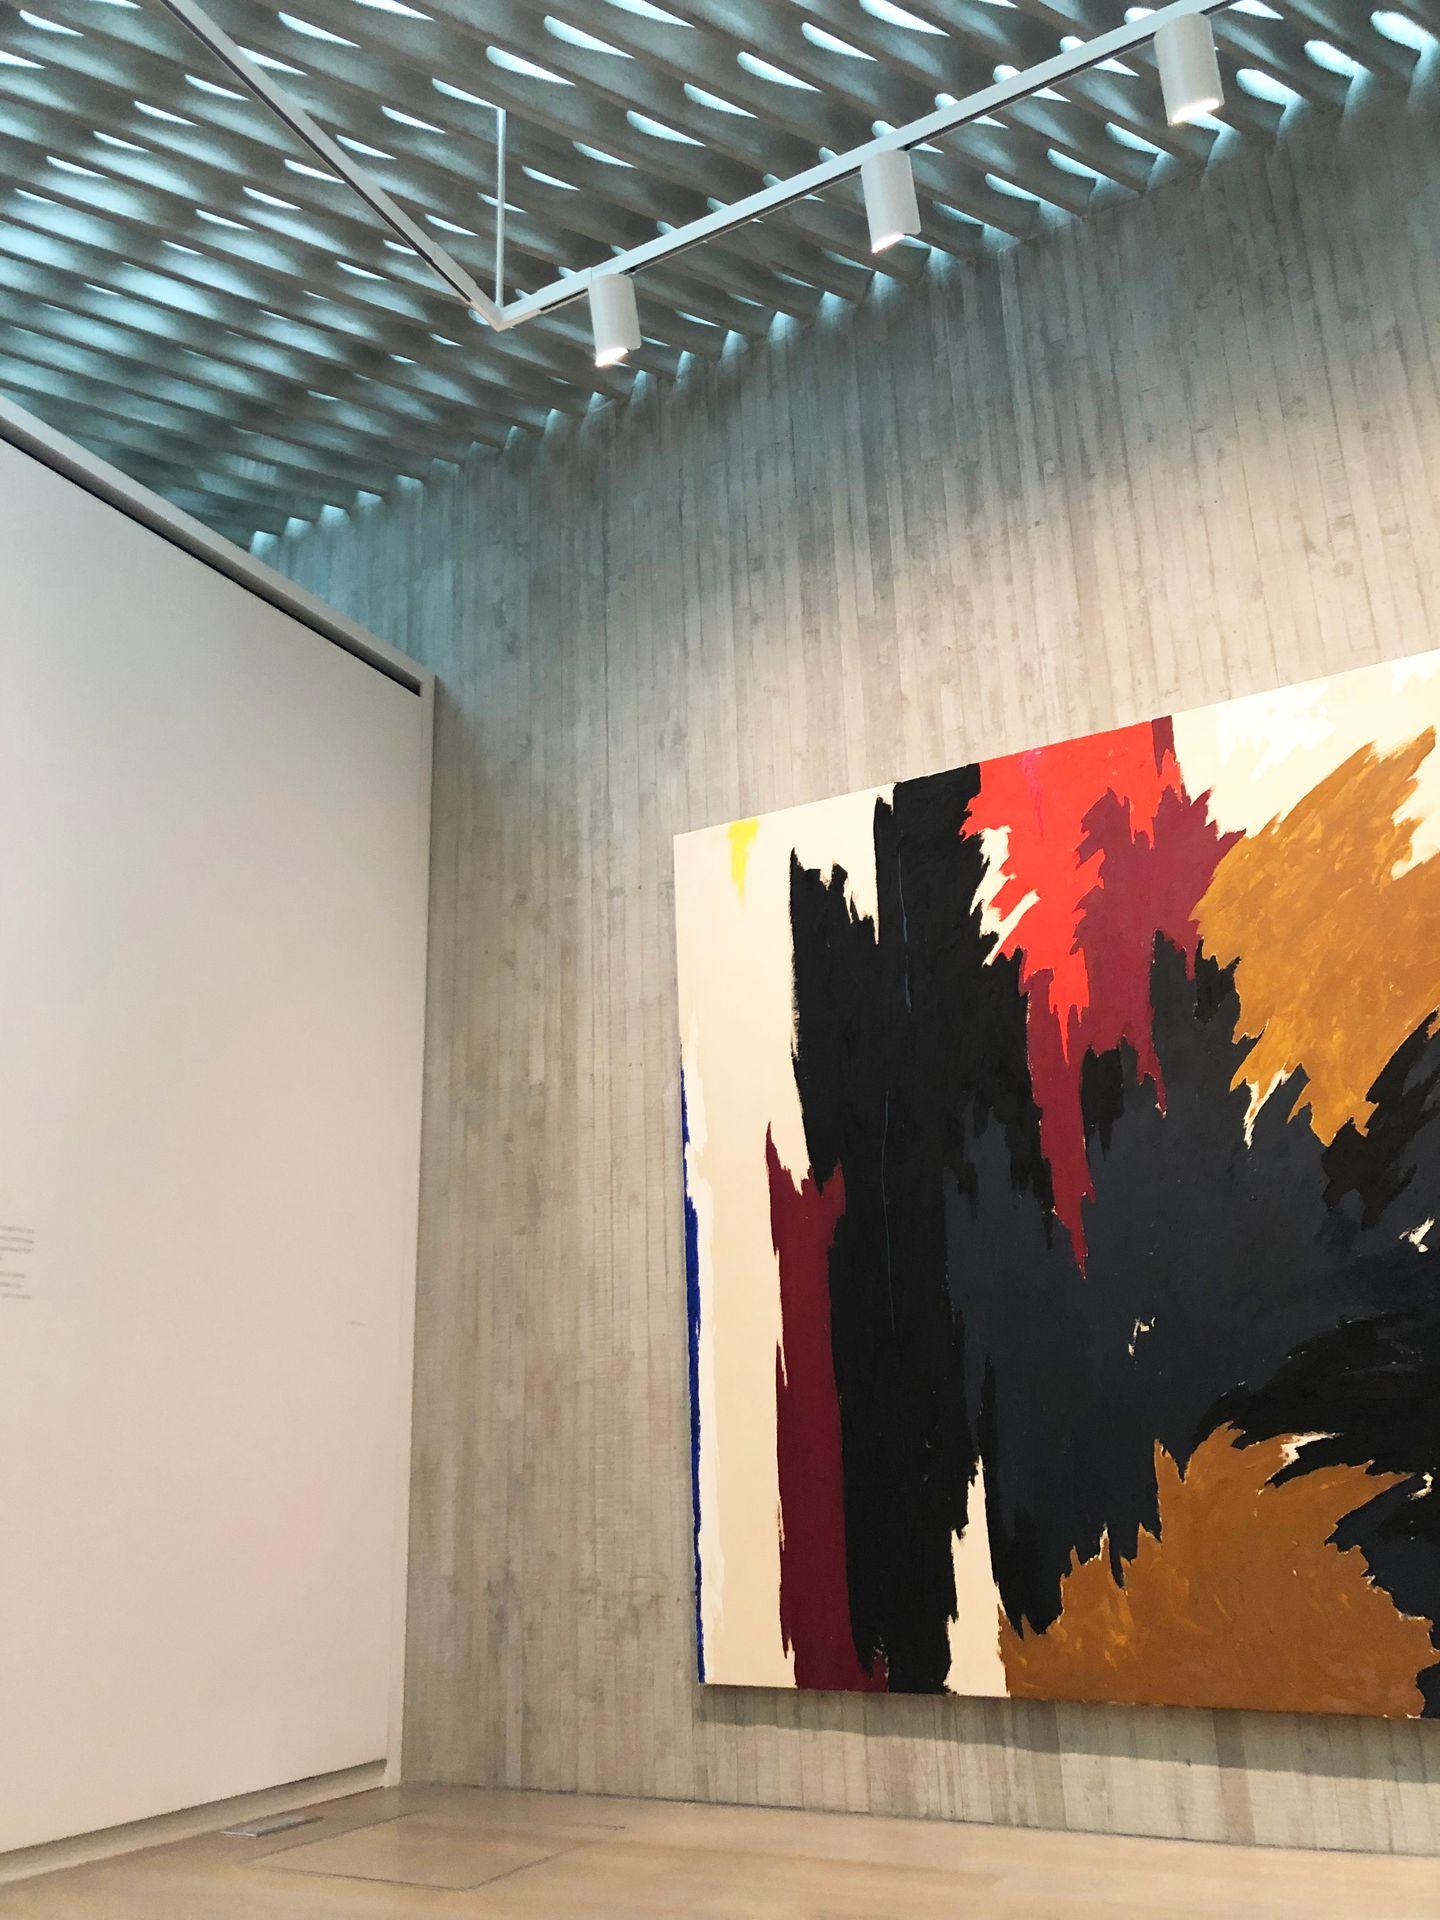 An abtract painting at the Clyfford Still Museum.